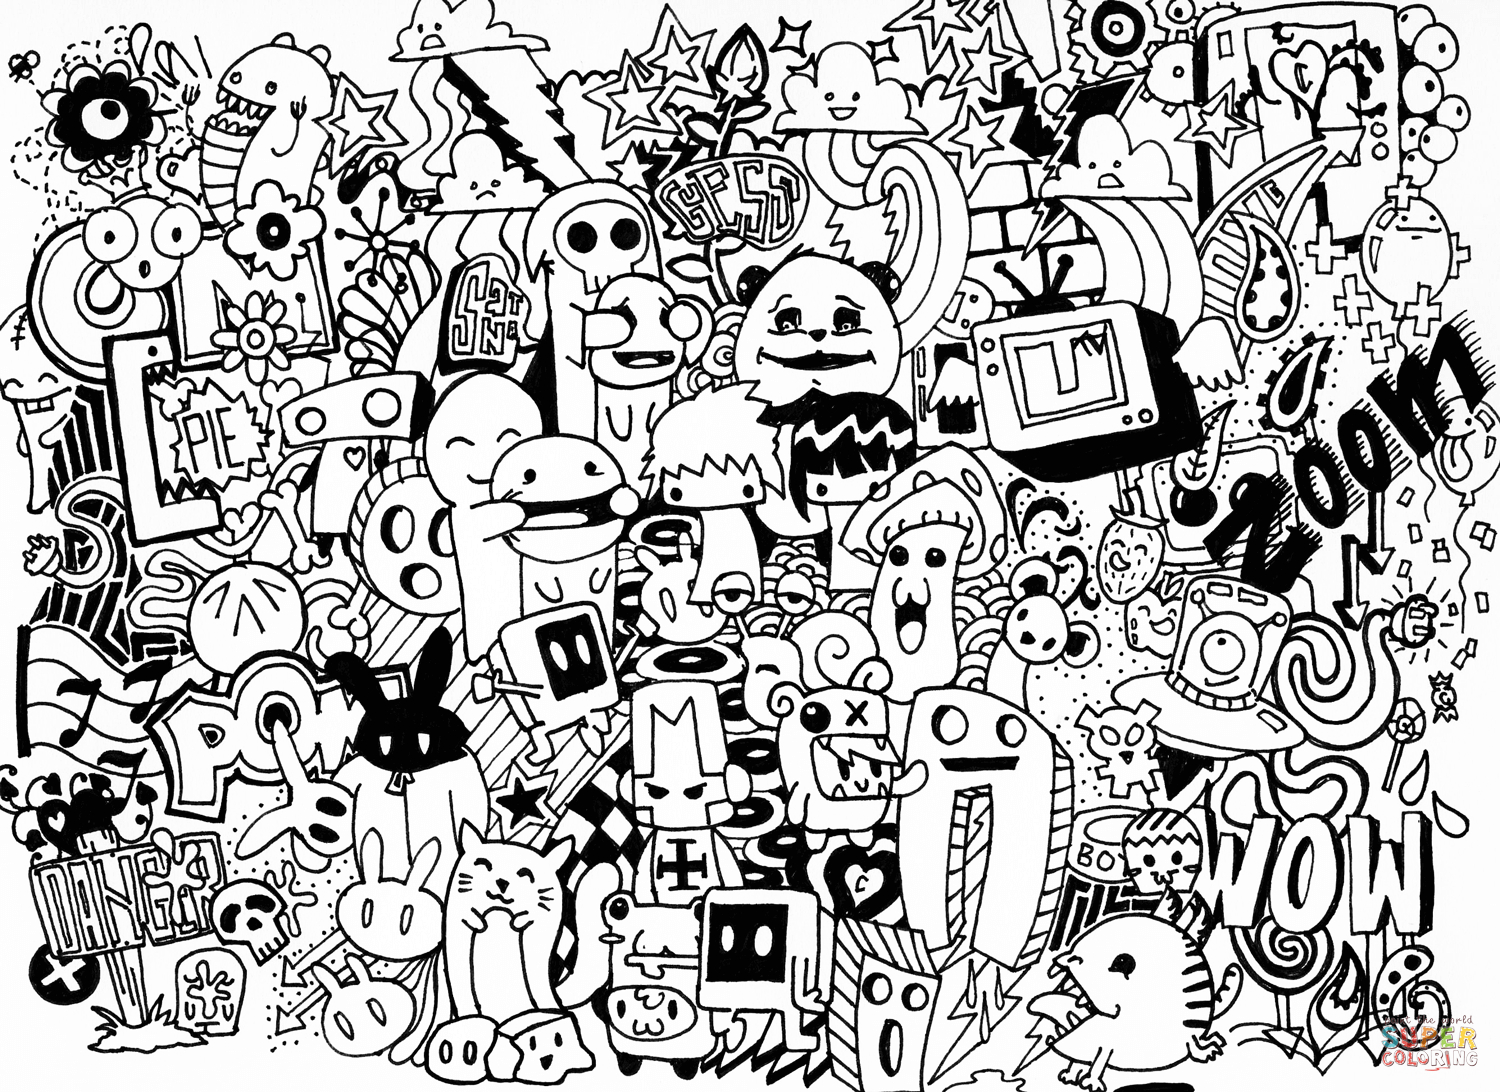 Doodle Art Coloring Pages | Free Coloring Pages | Doodled In 2019 - Free Printable Doodle Art Coloring Pages